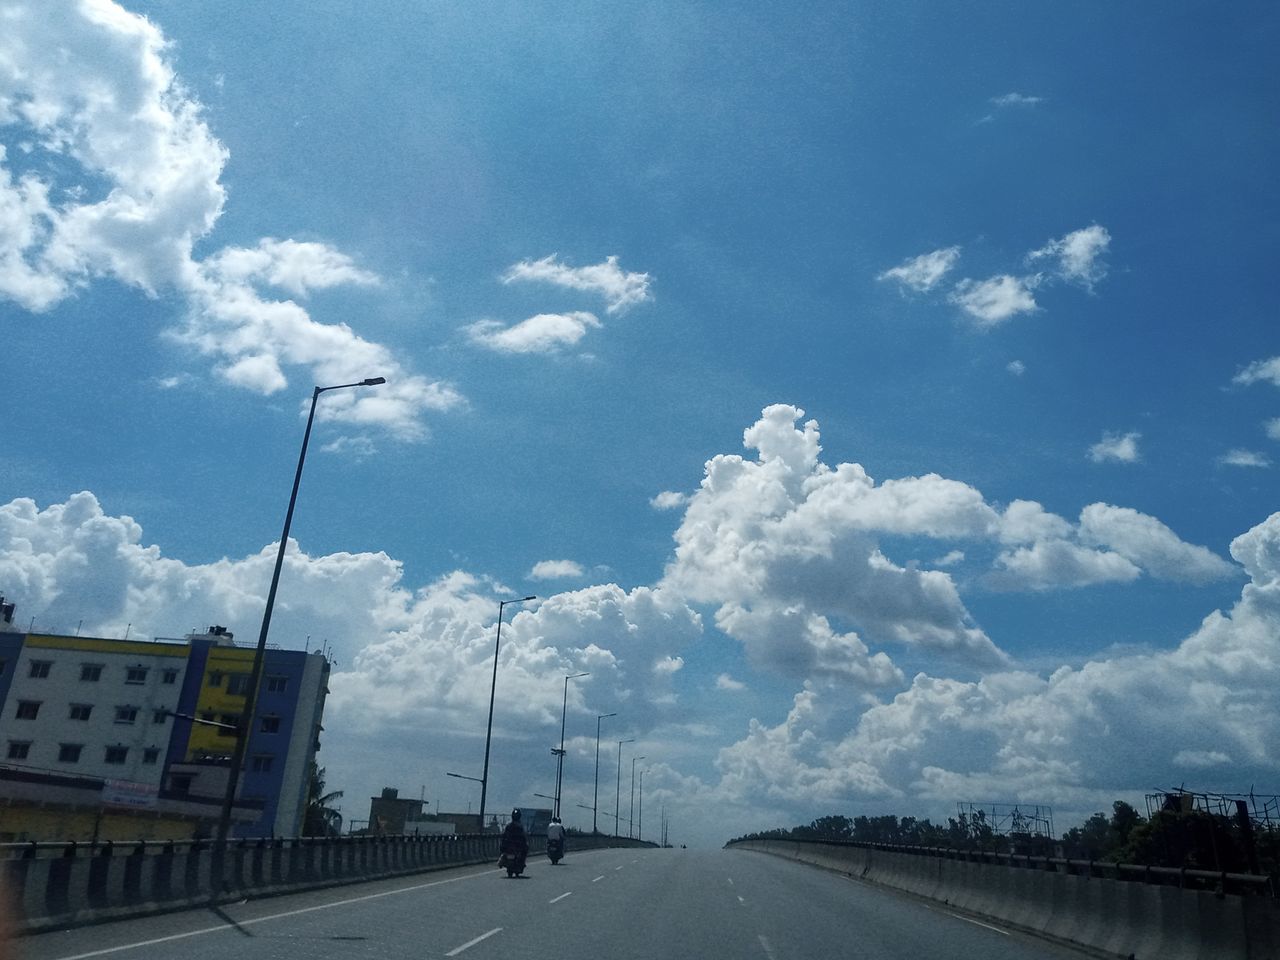 cloud, sky, transportation, road, highway, street, city, nature, the way forward, horizon, sign, mode of transportation, architecture, freeway, car, symbol, motor vehicle, road marking, marking, no people, day, travel, built structure, diminishing perspective, outdoors, blue, infrastructure, vanishing point, street light, lane, travel destinations, building exterior, road sign